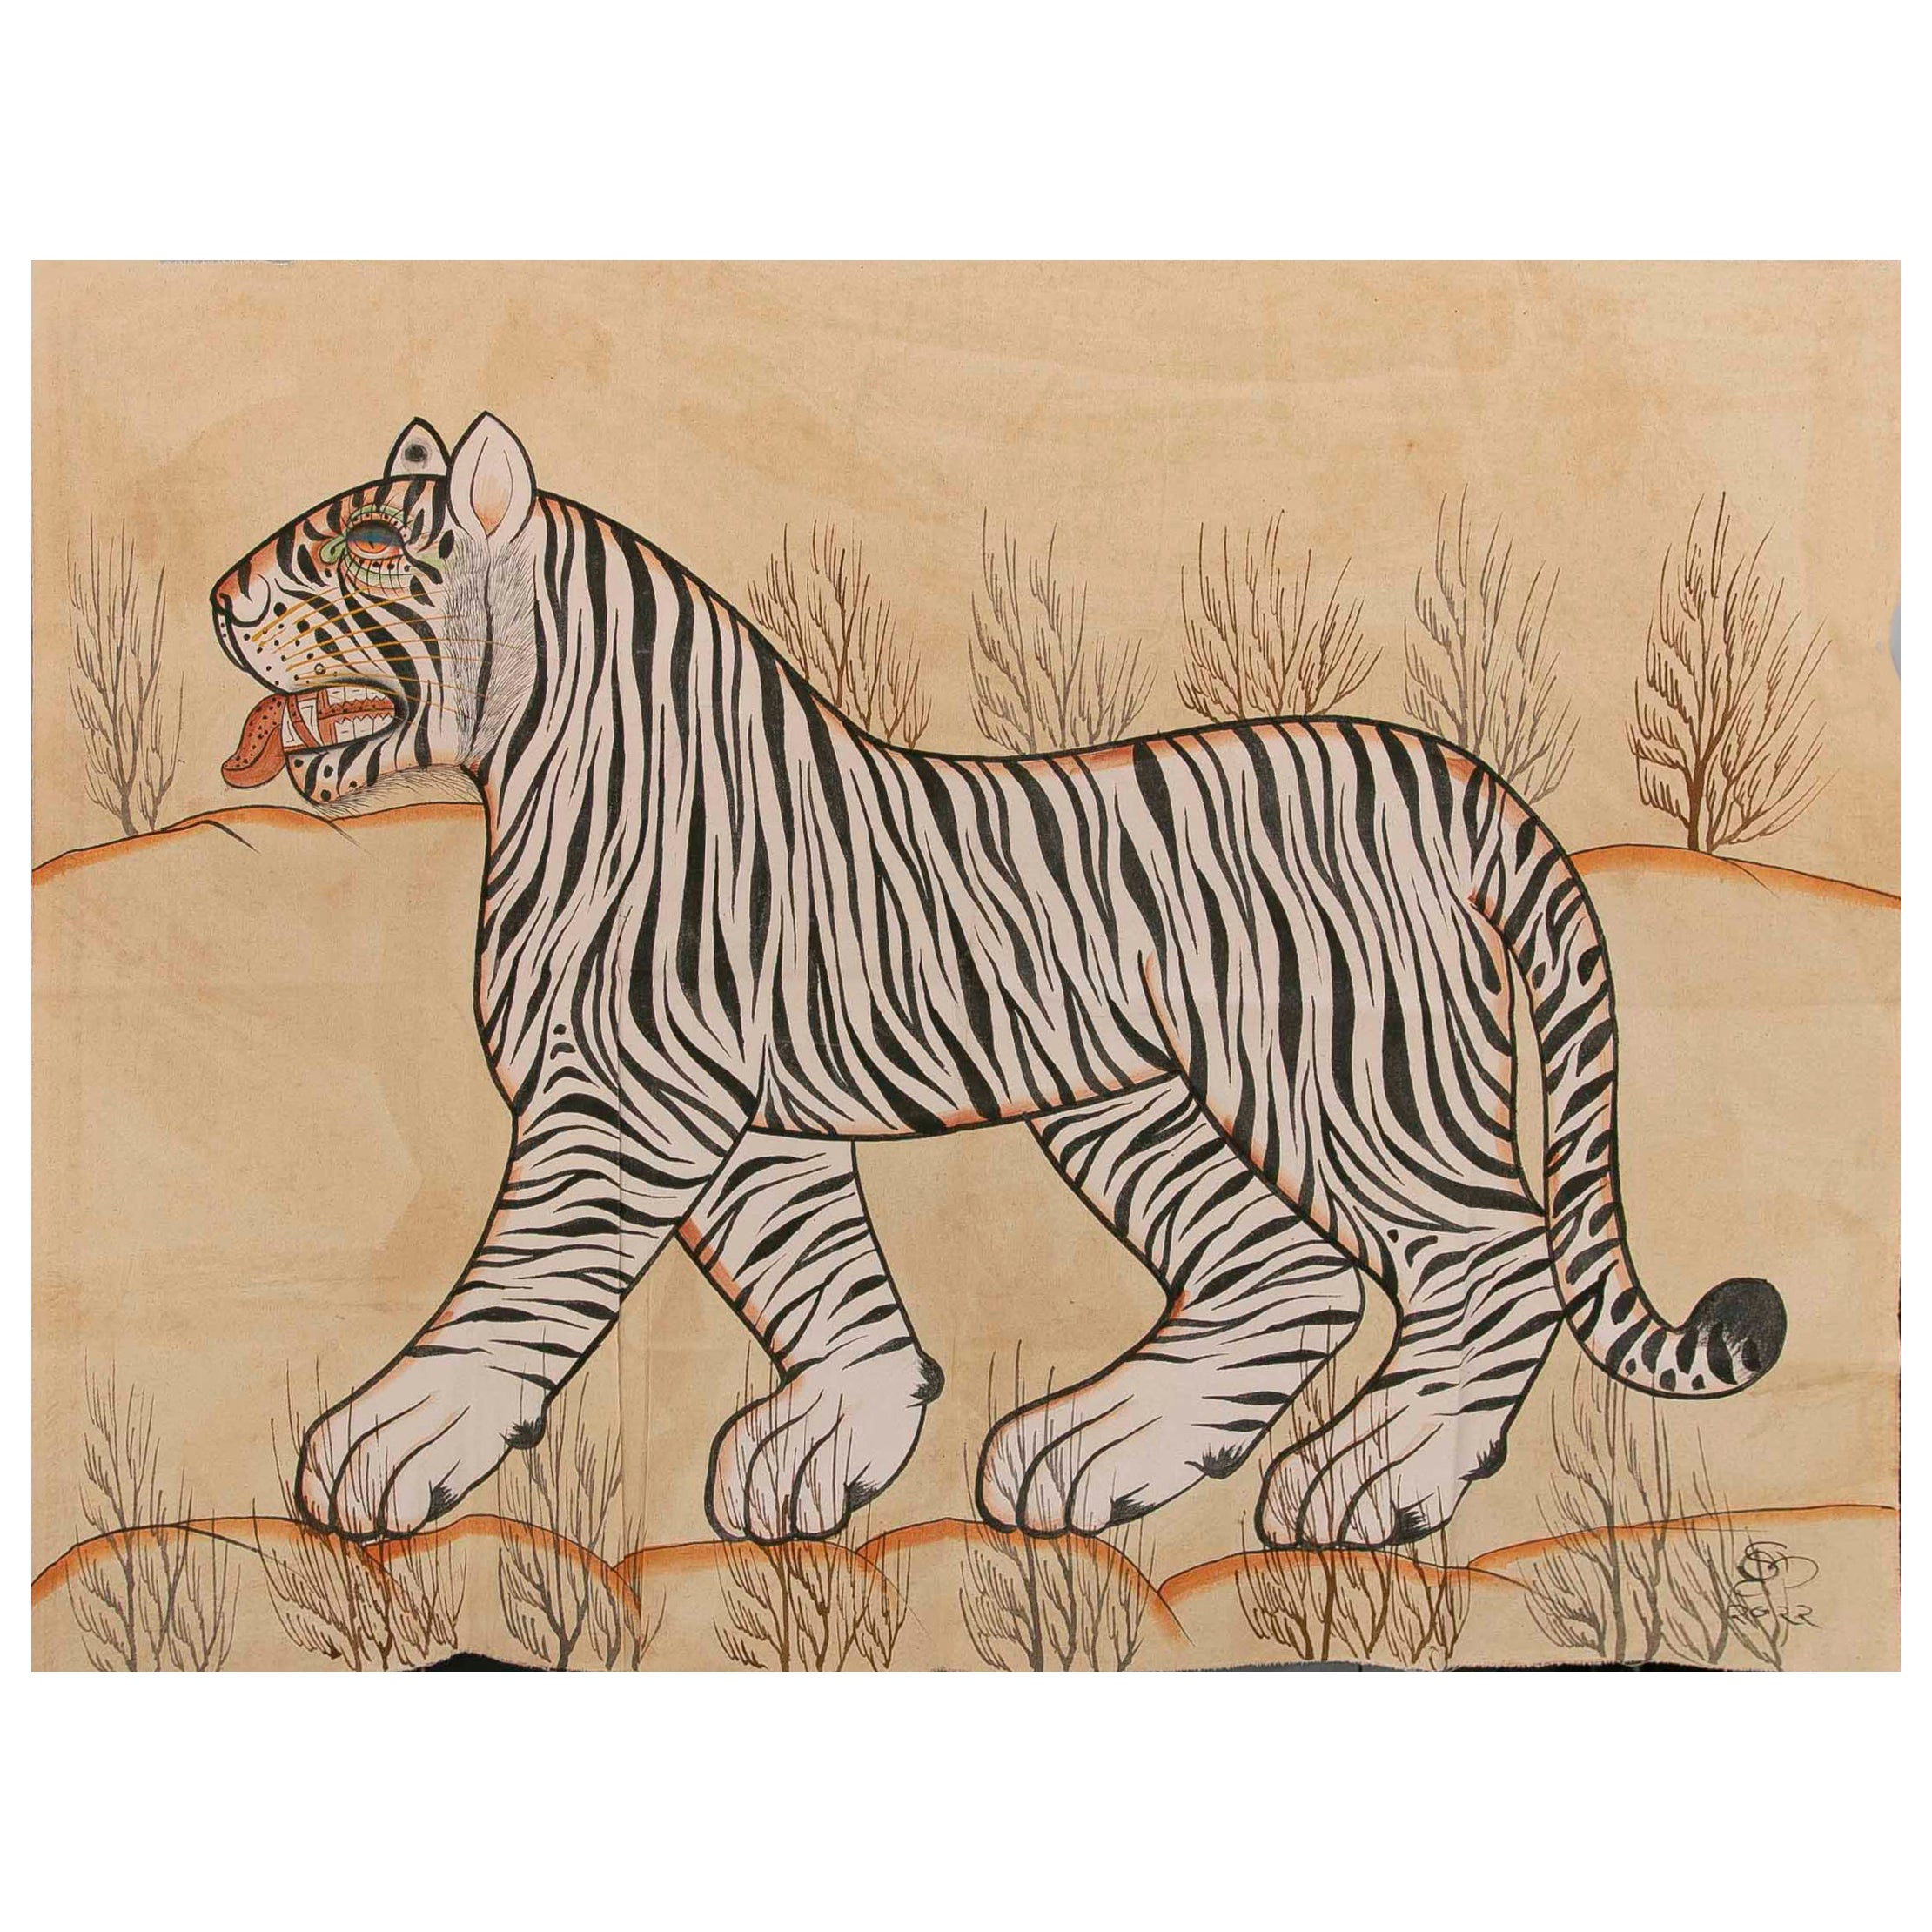 1970s Jaime Parlade Designer Hand Painting "Bengal Tiger" For Sale